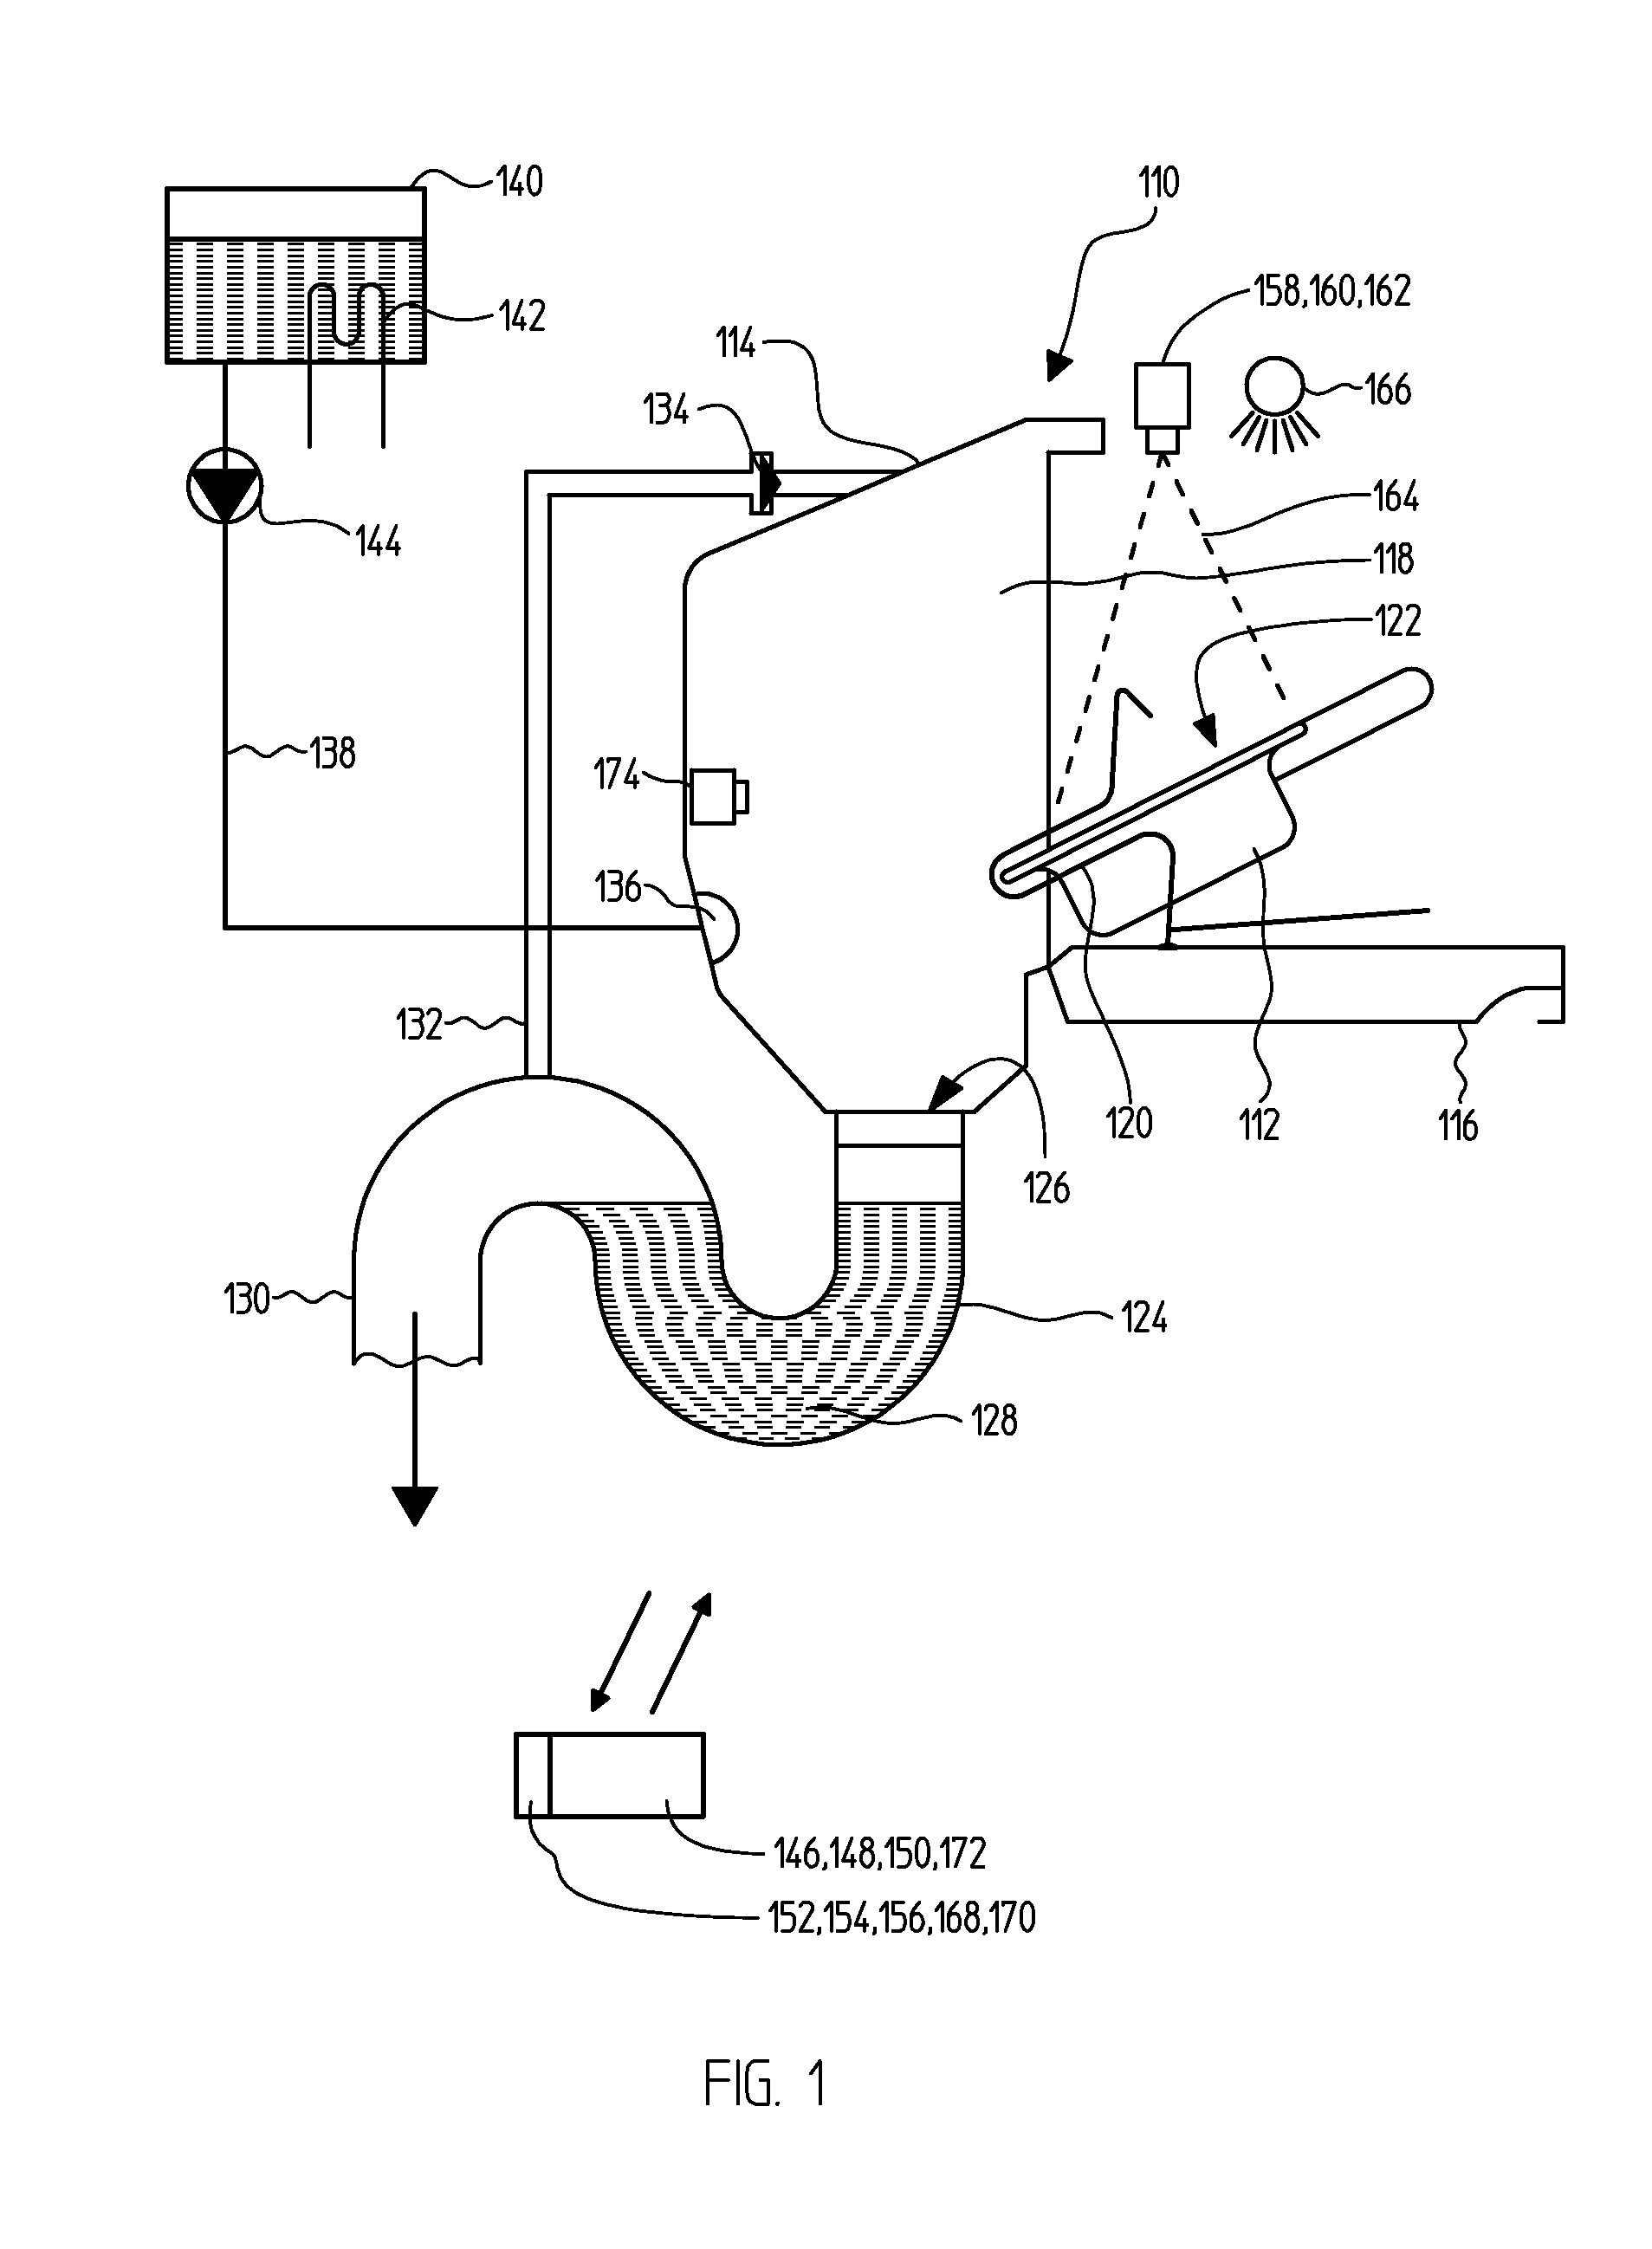 Cleaning and disinfecting apparatus for treating containers for human excretions